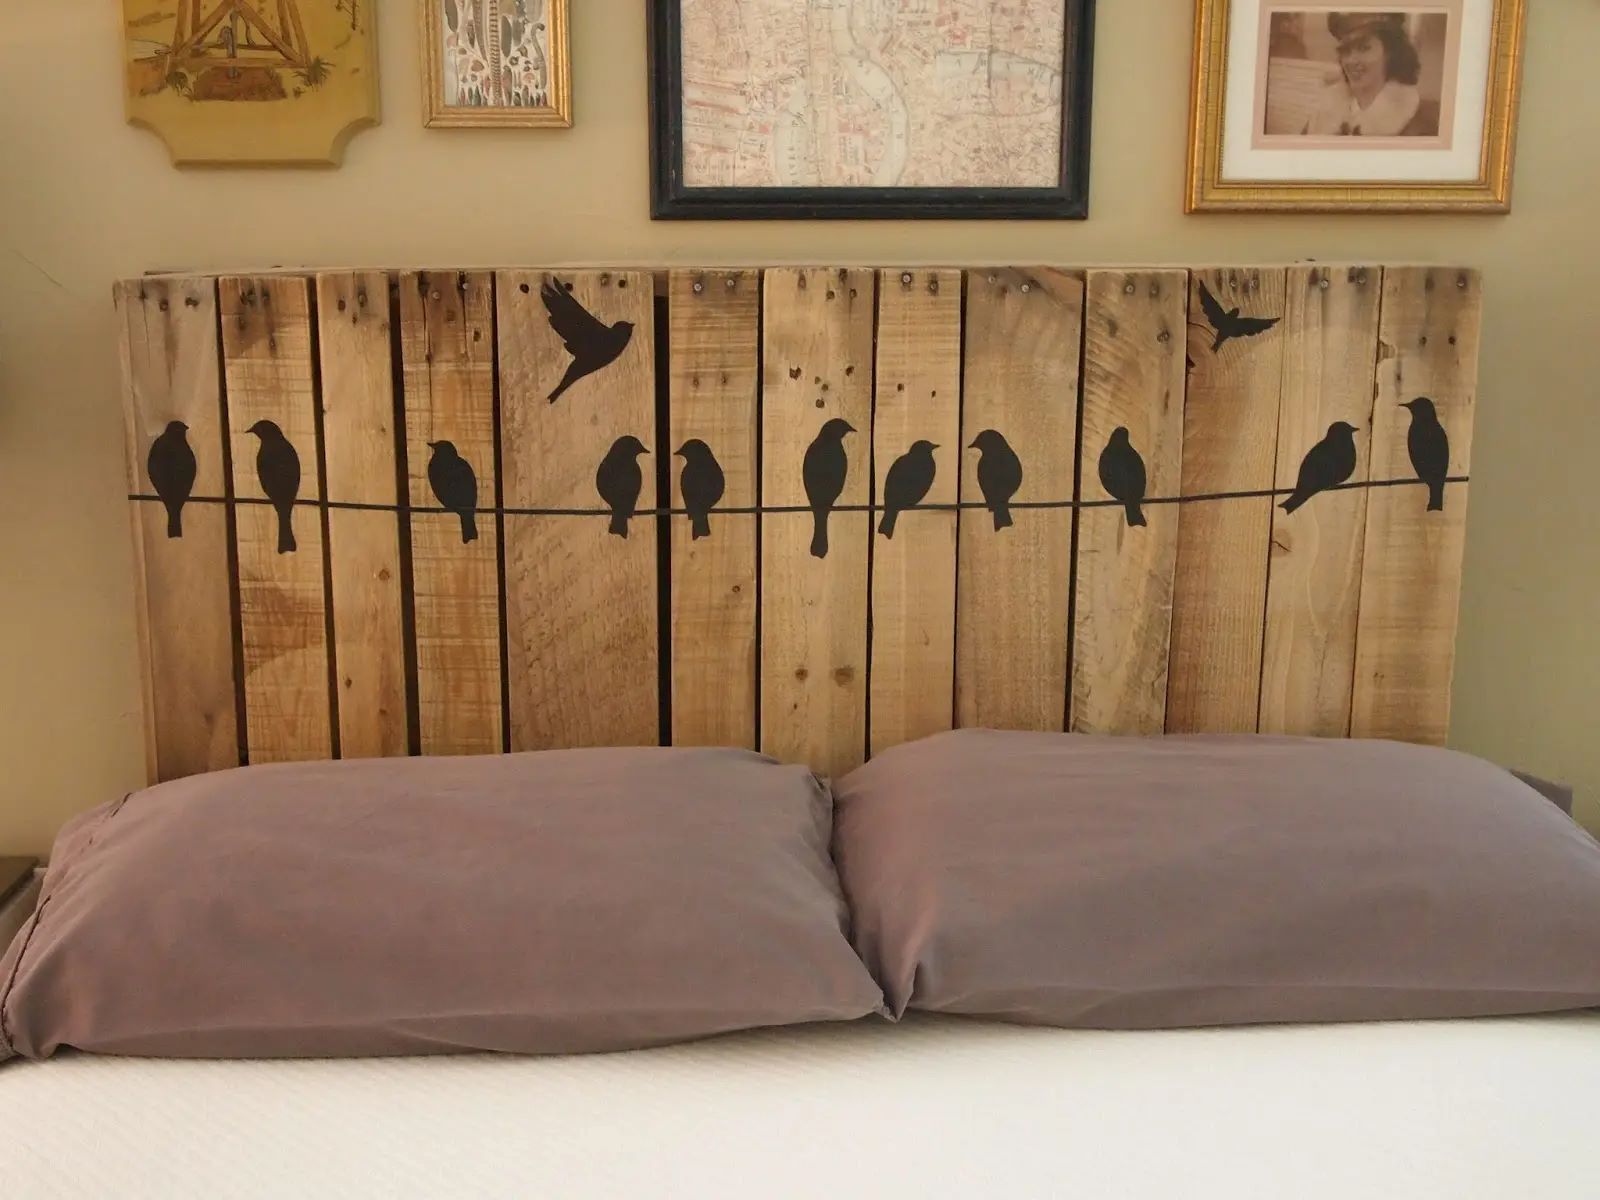 Transform Your Bedroom With A DIY Pallet Headboard: A Home Improvement Project